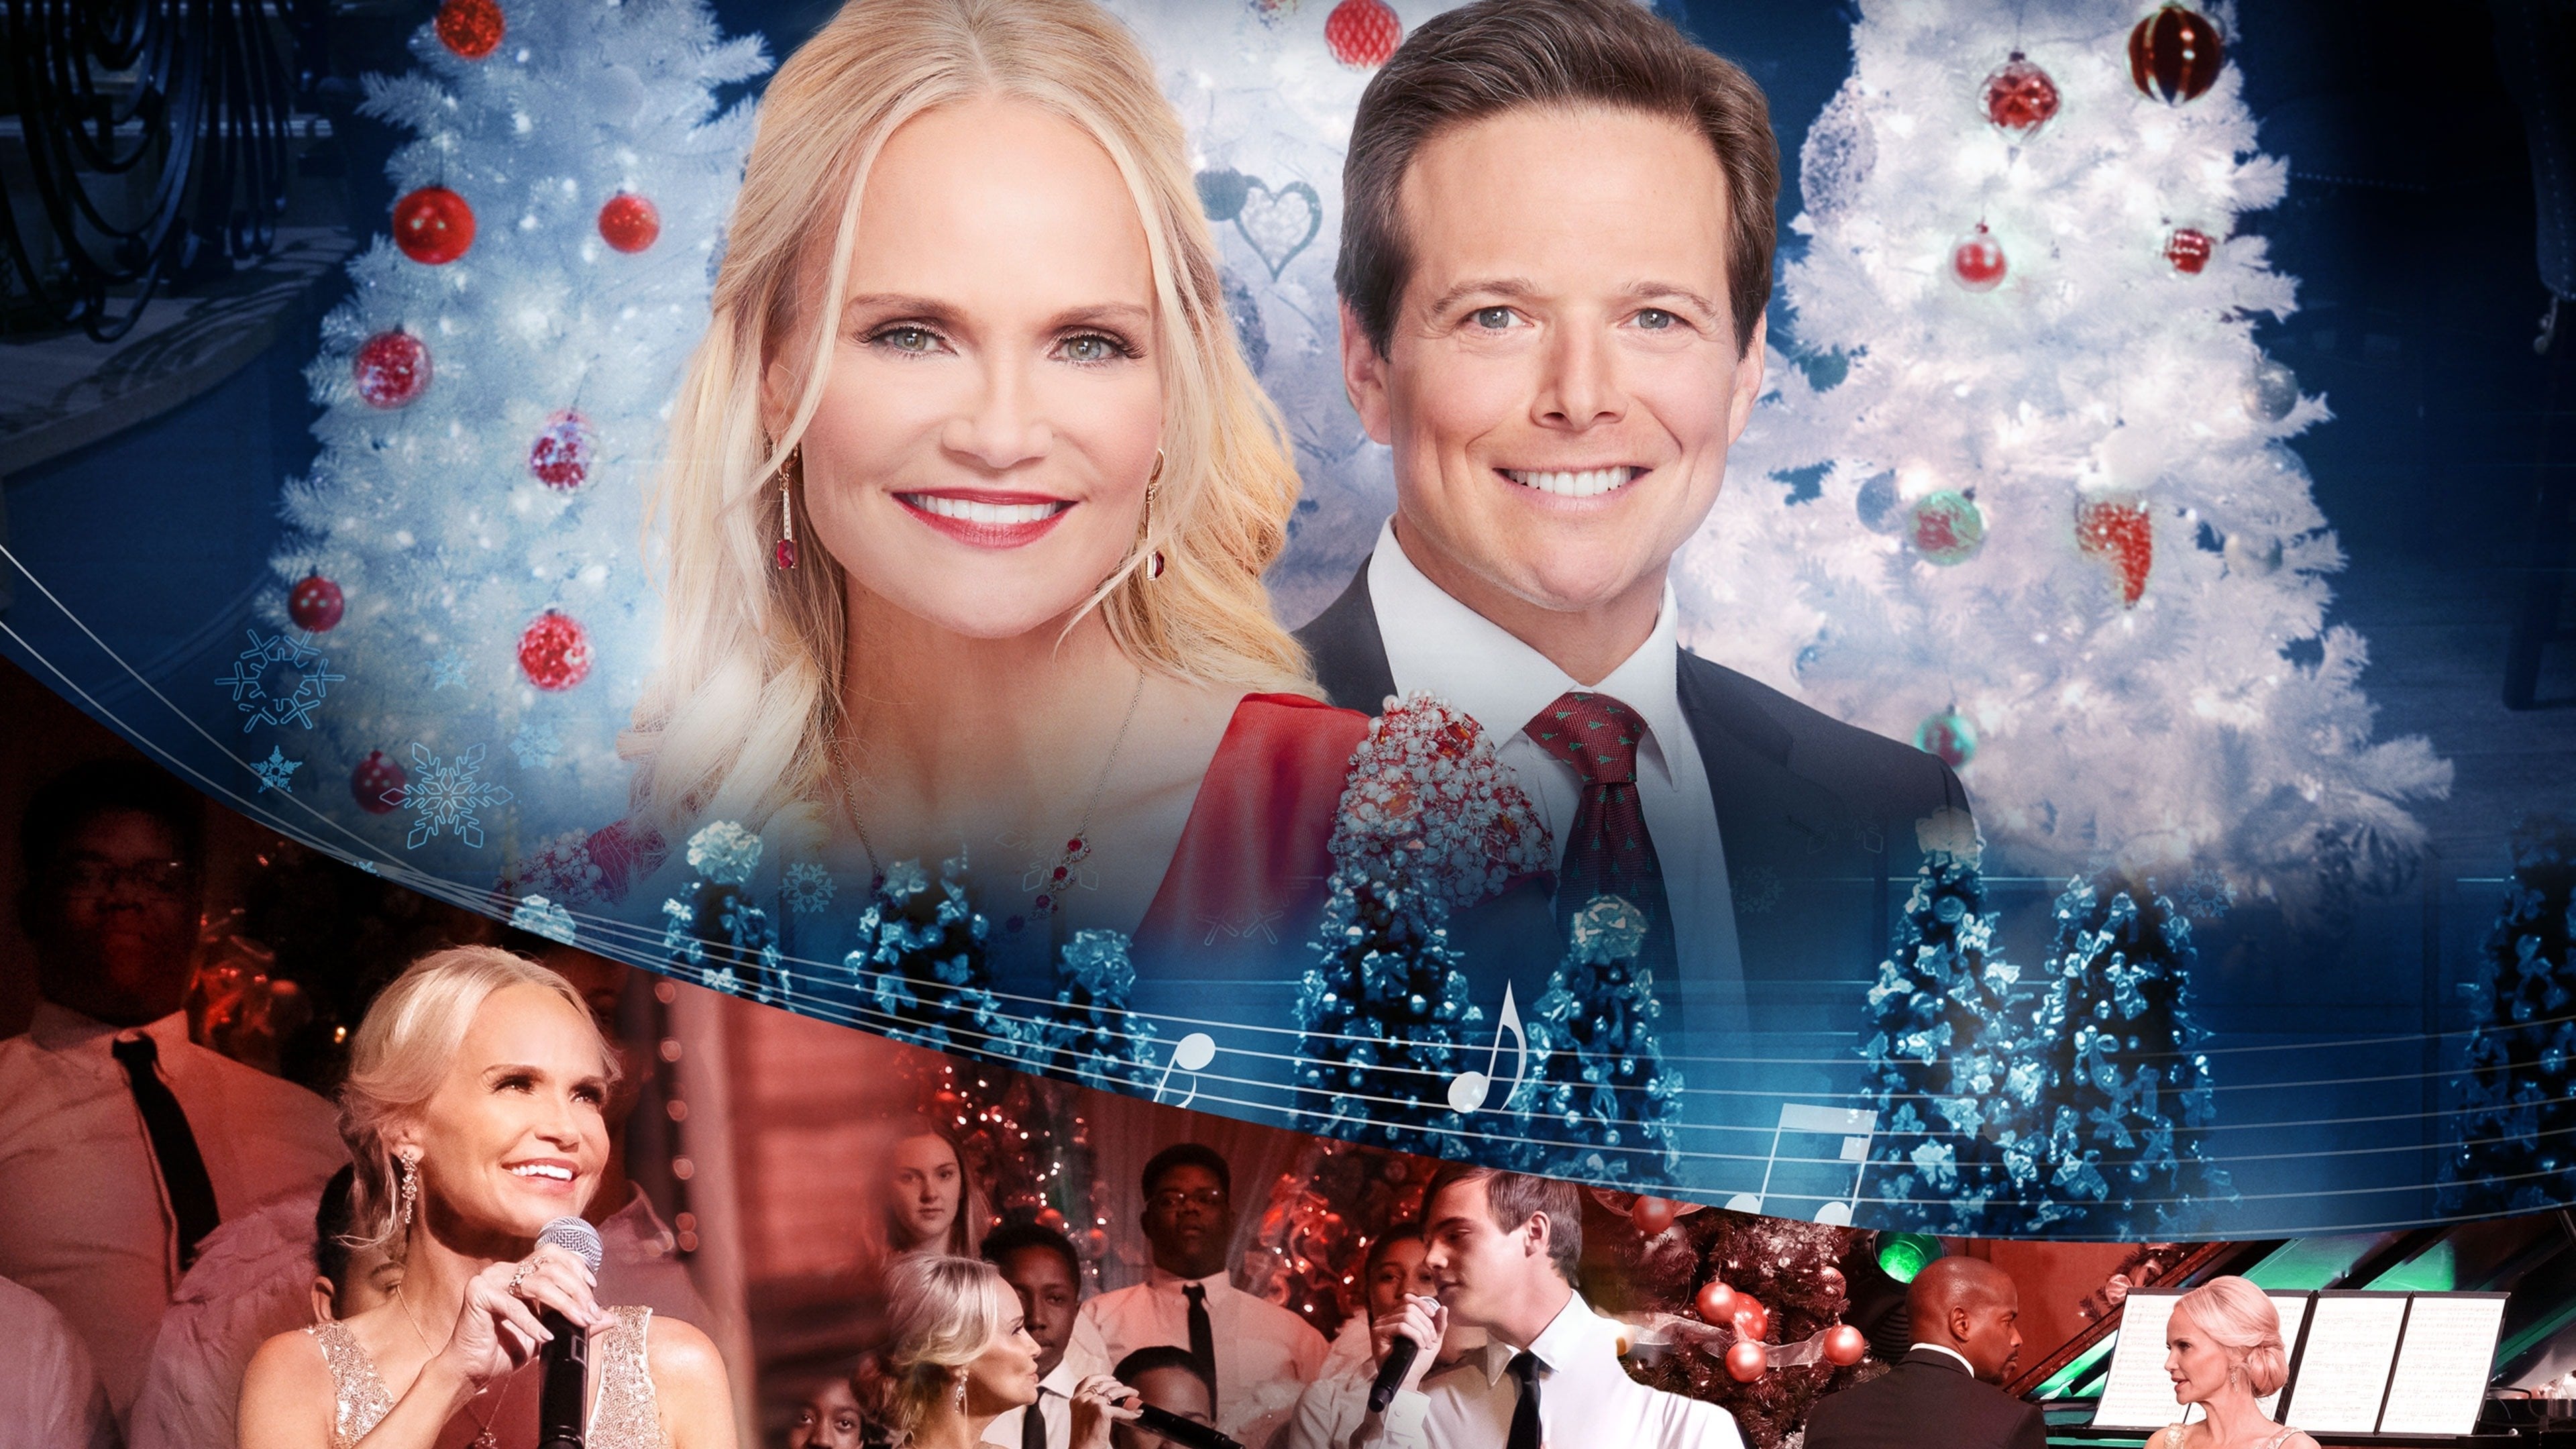 A Christmas Love Story 2019 123movies